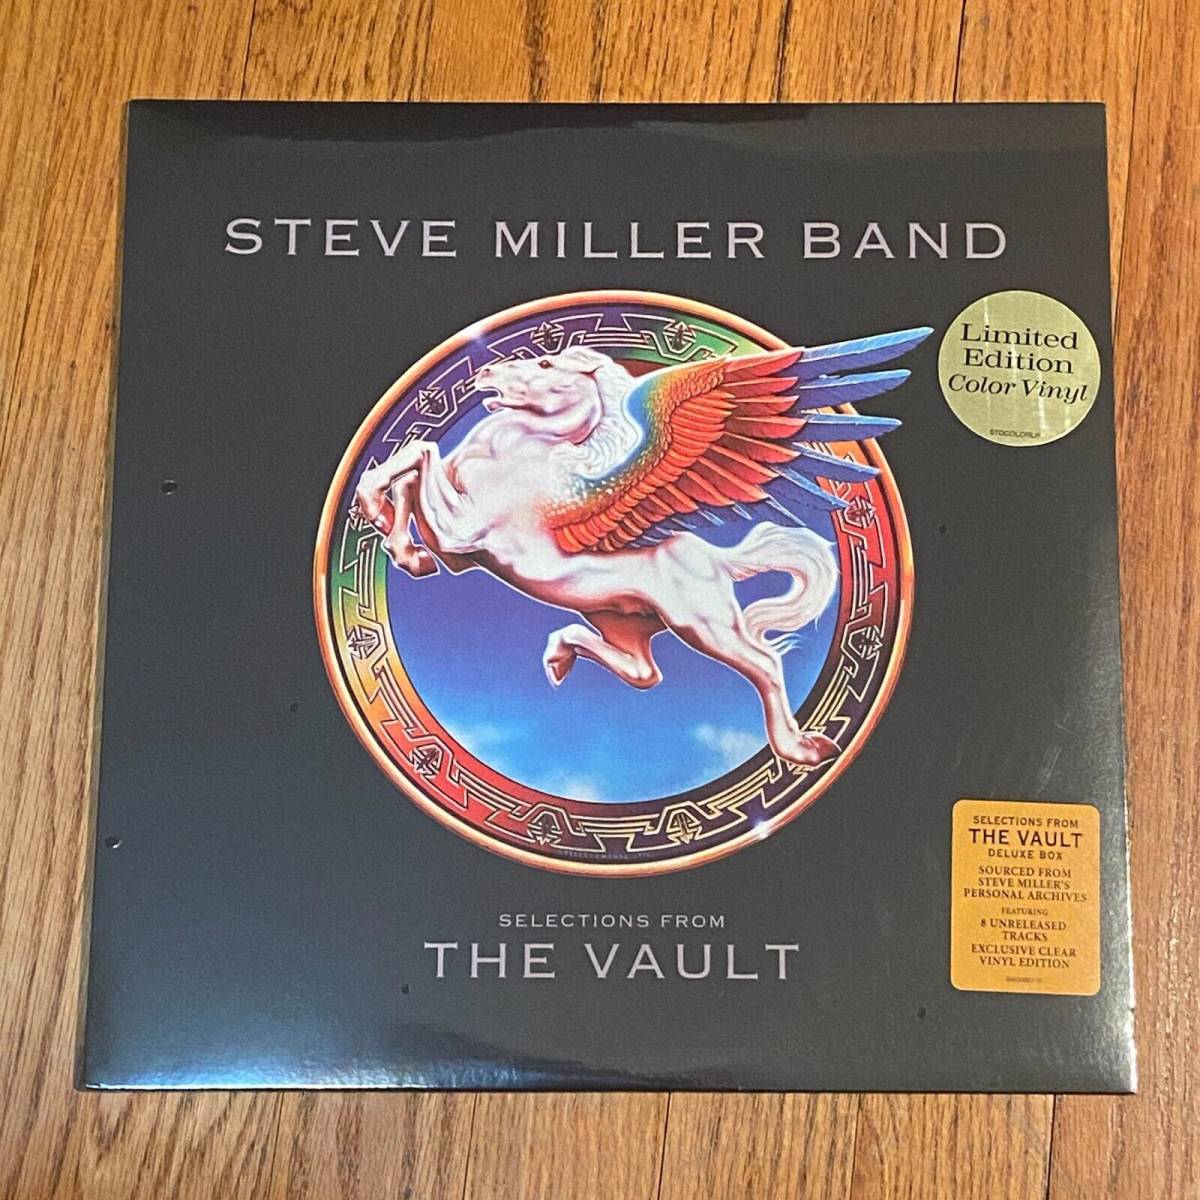 Steve Miller Band - Selections From The Vault Limited Edition Clear Vinyl LP NEW 海外 即決